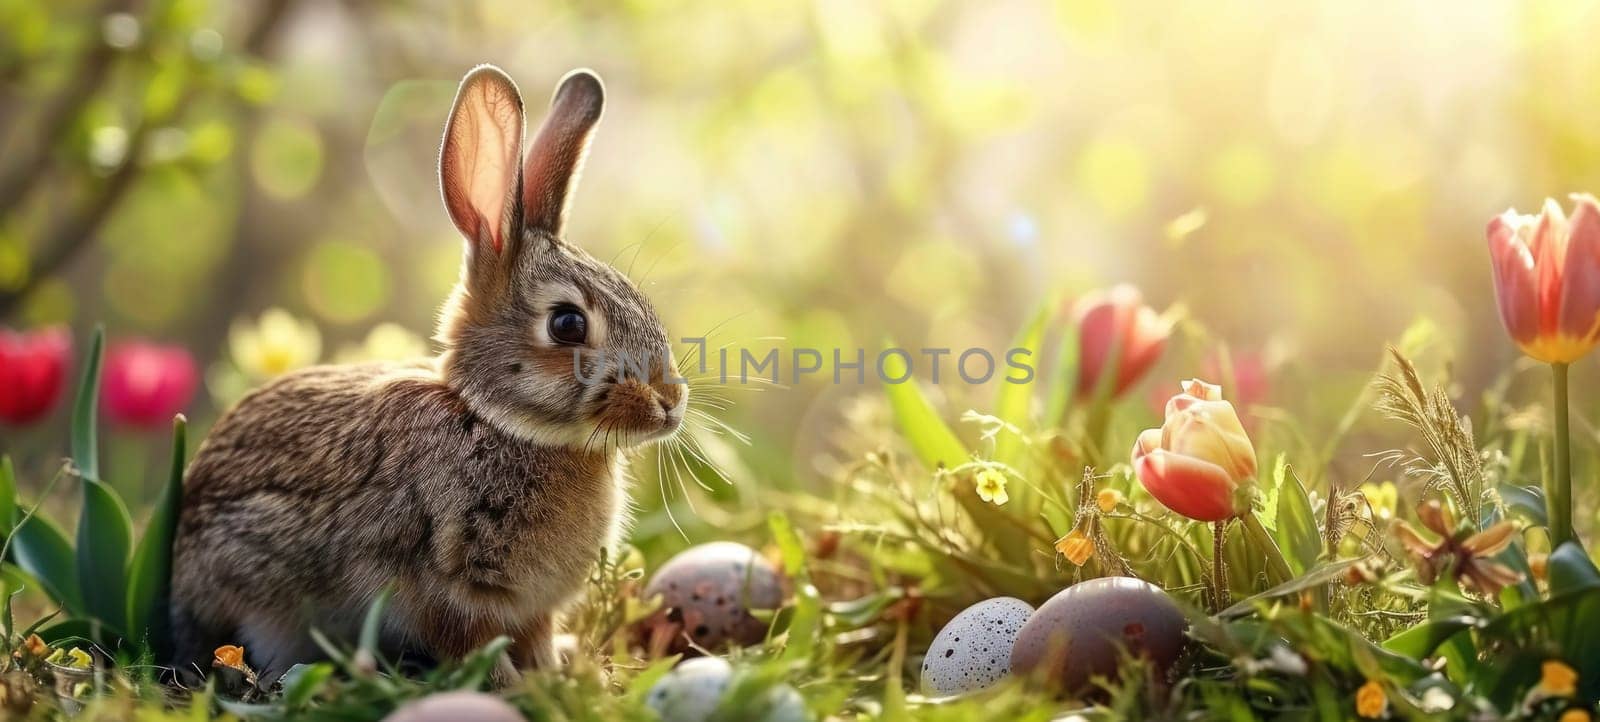 A charming bunny enjoys the beauty of a sun-drenched flower garden, surrounded by Easter eggs and blooming tulips.